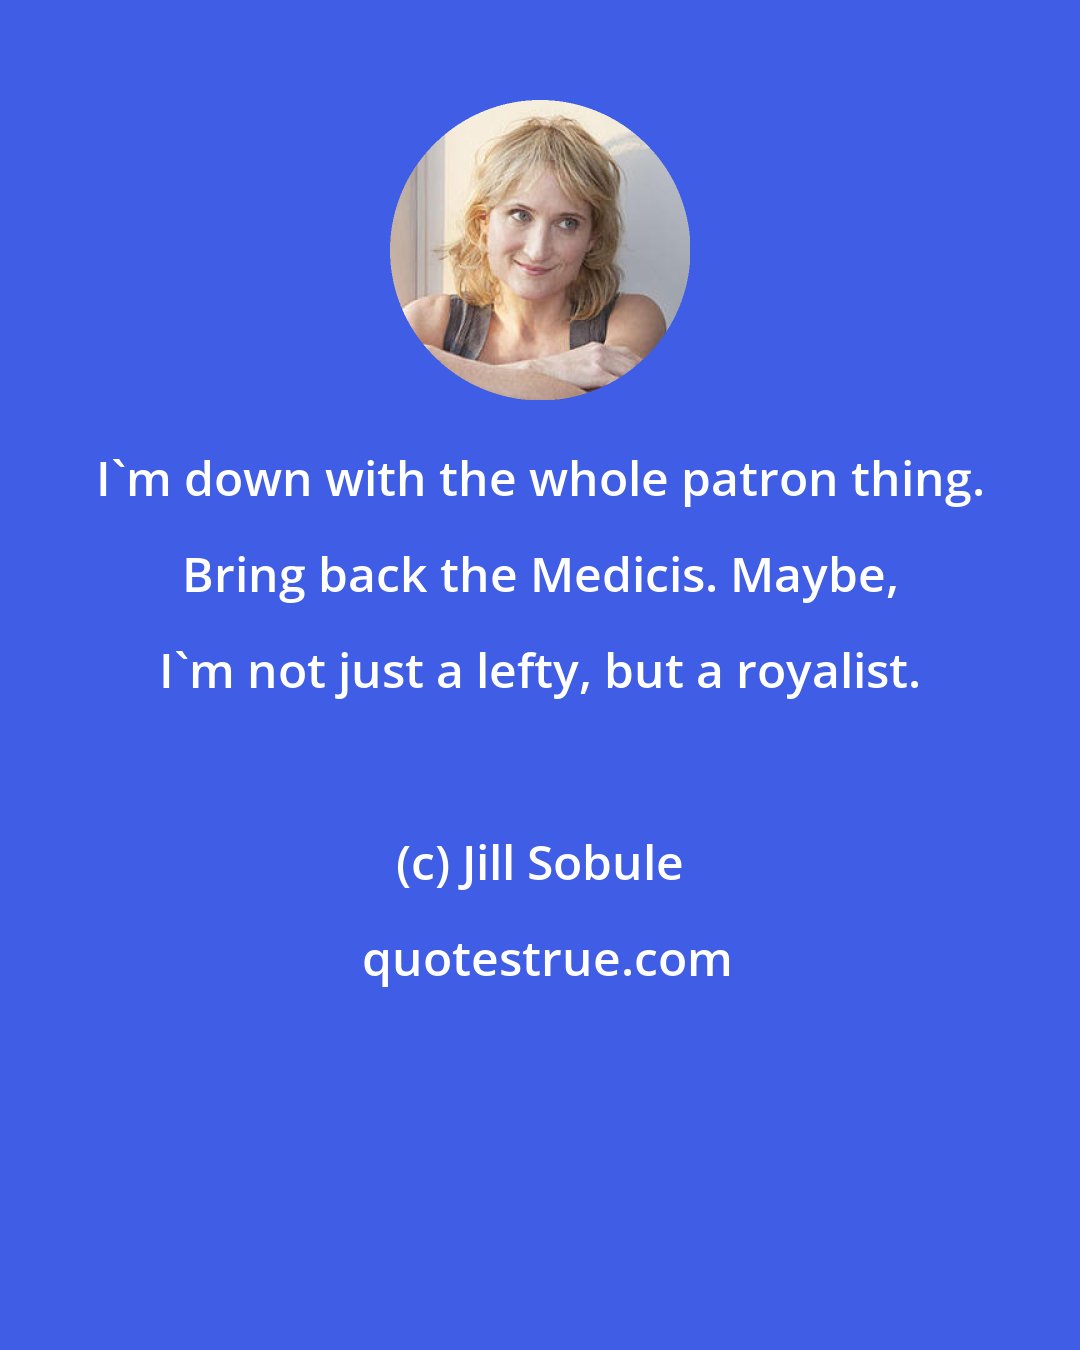 Jill Sobule: I'm down with the whole patron thing. Bring back the Medicis. Maybe, I'm not just a lefty, but a royalist.